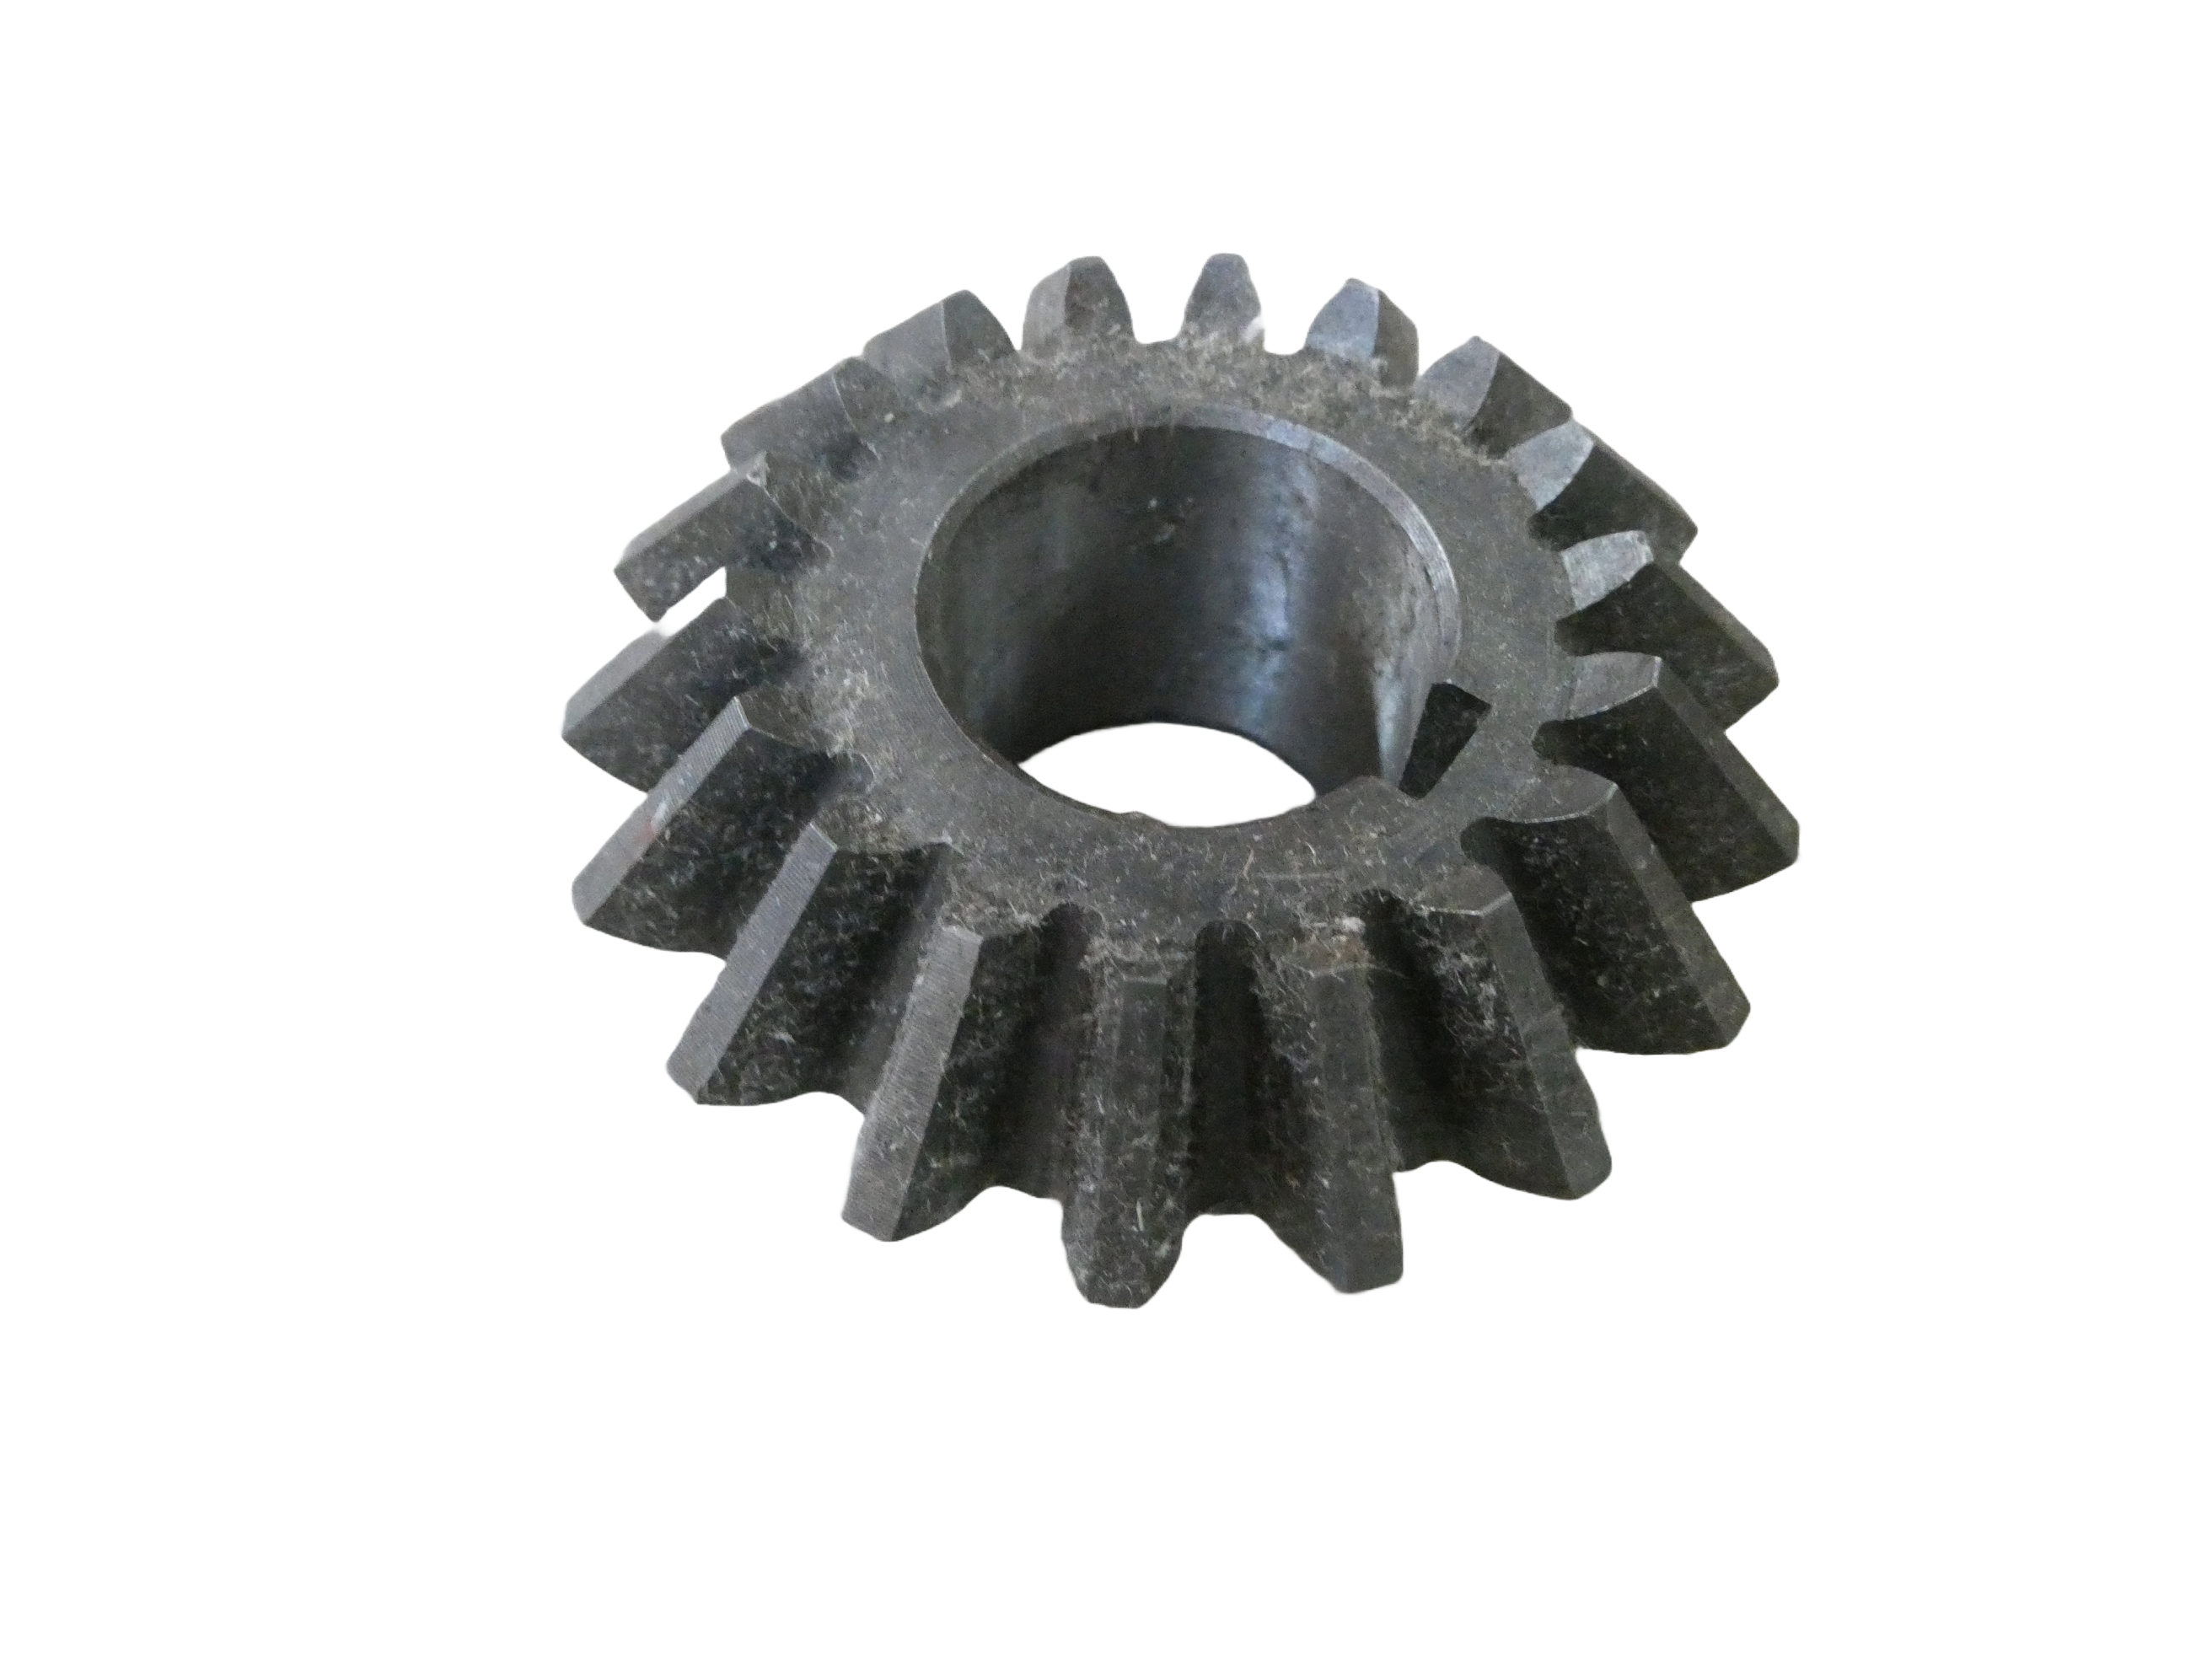 18 Straight Tooth Gear